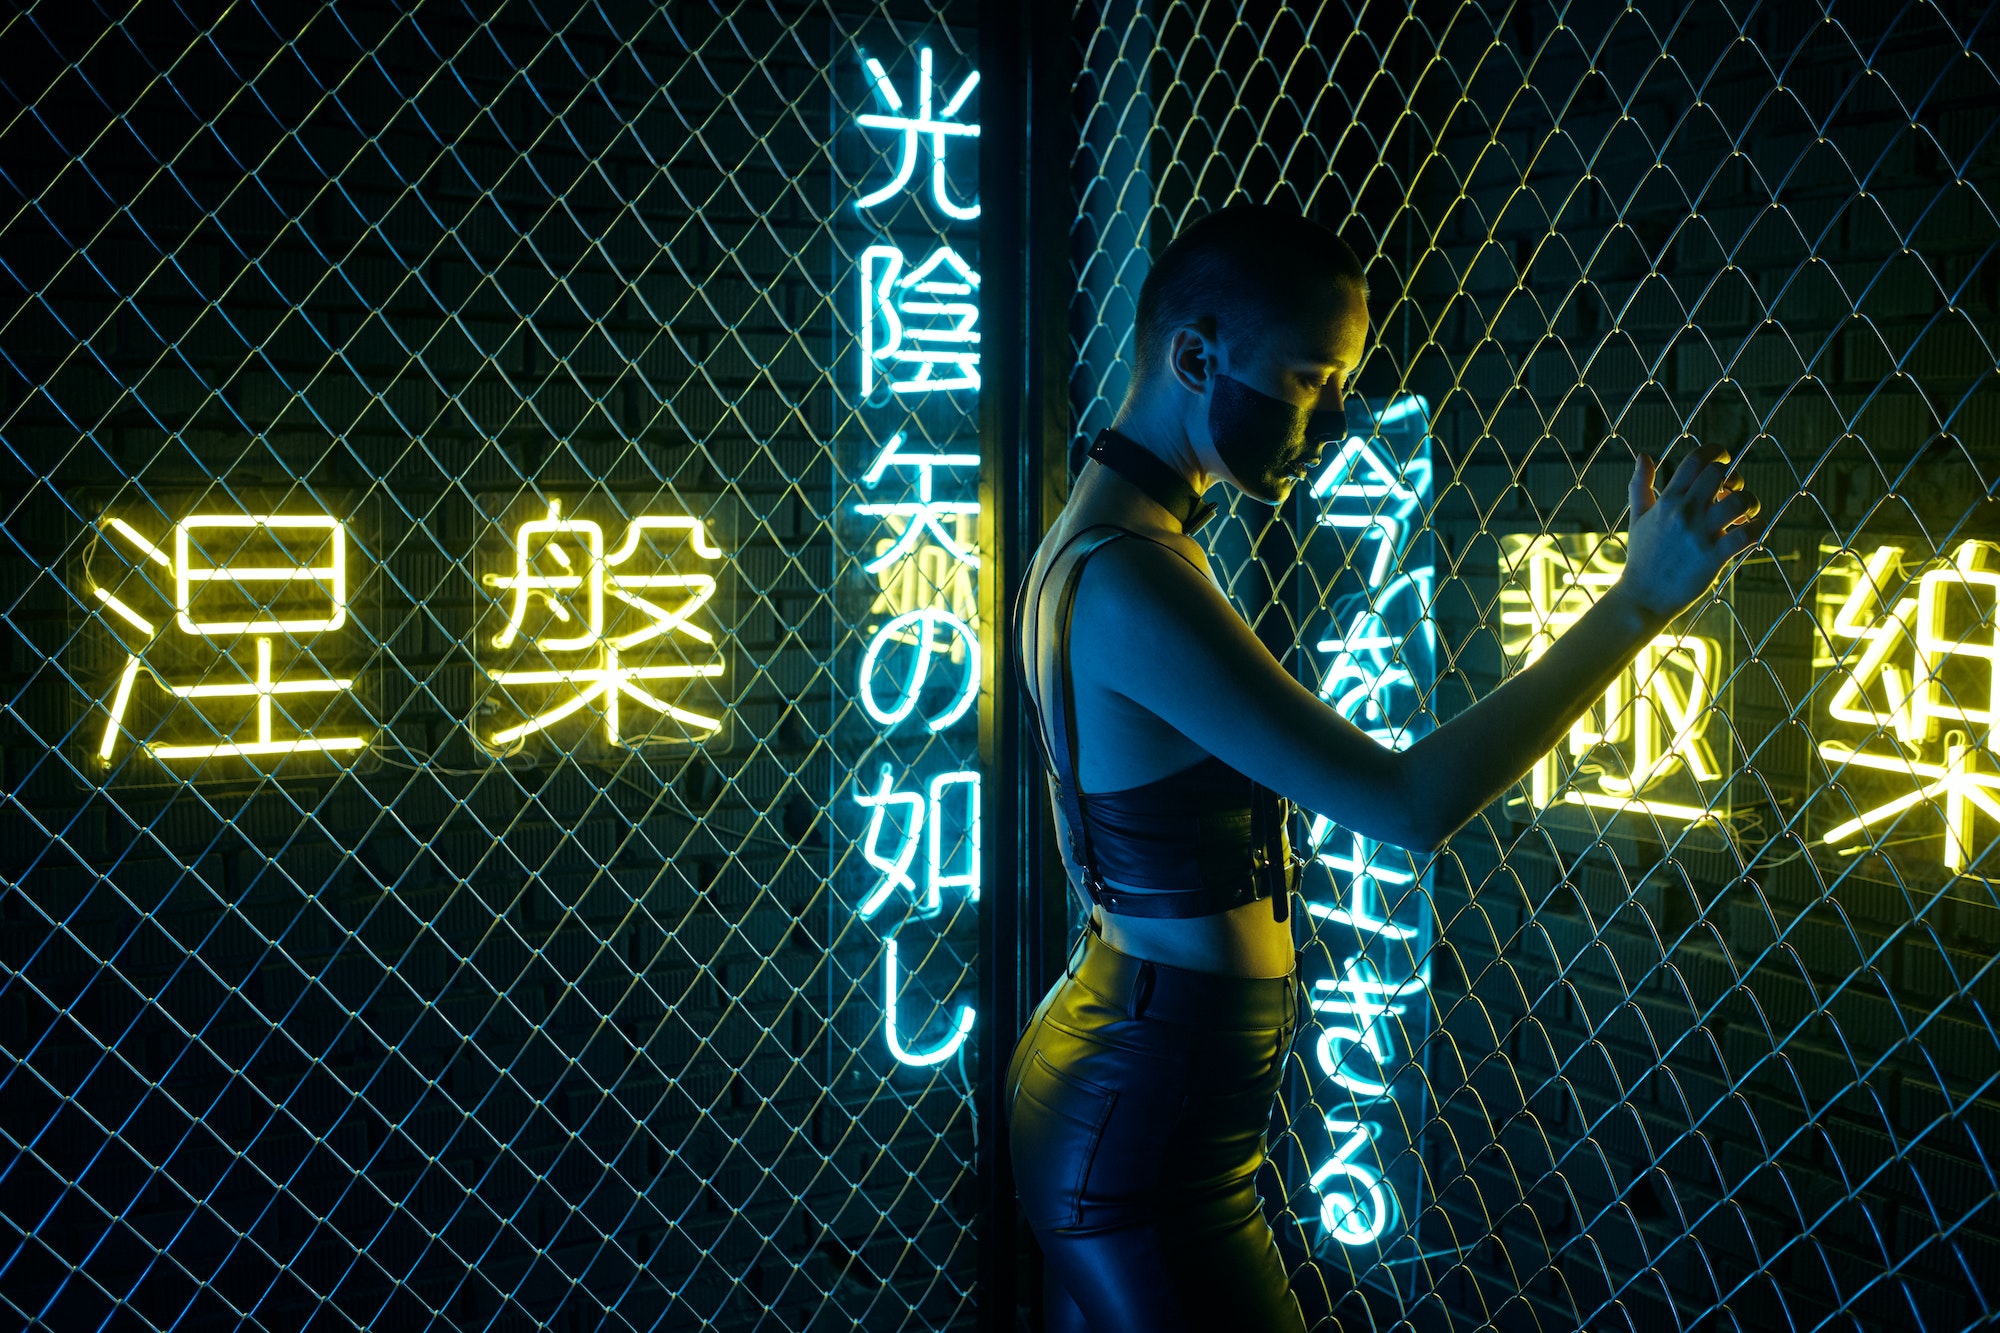 Cyborg girl in black leather clothes standing behind bars